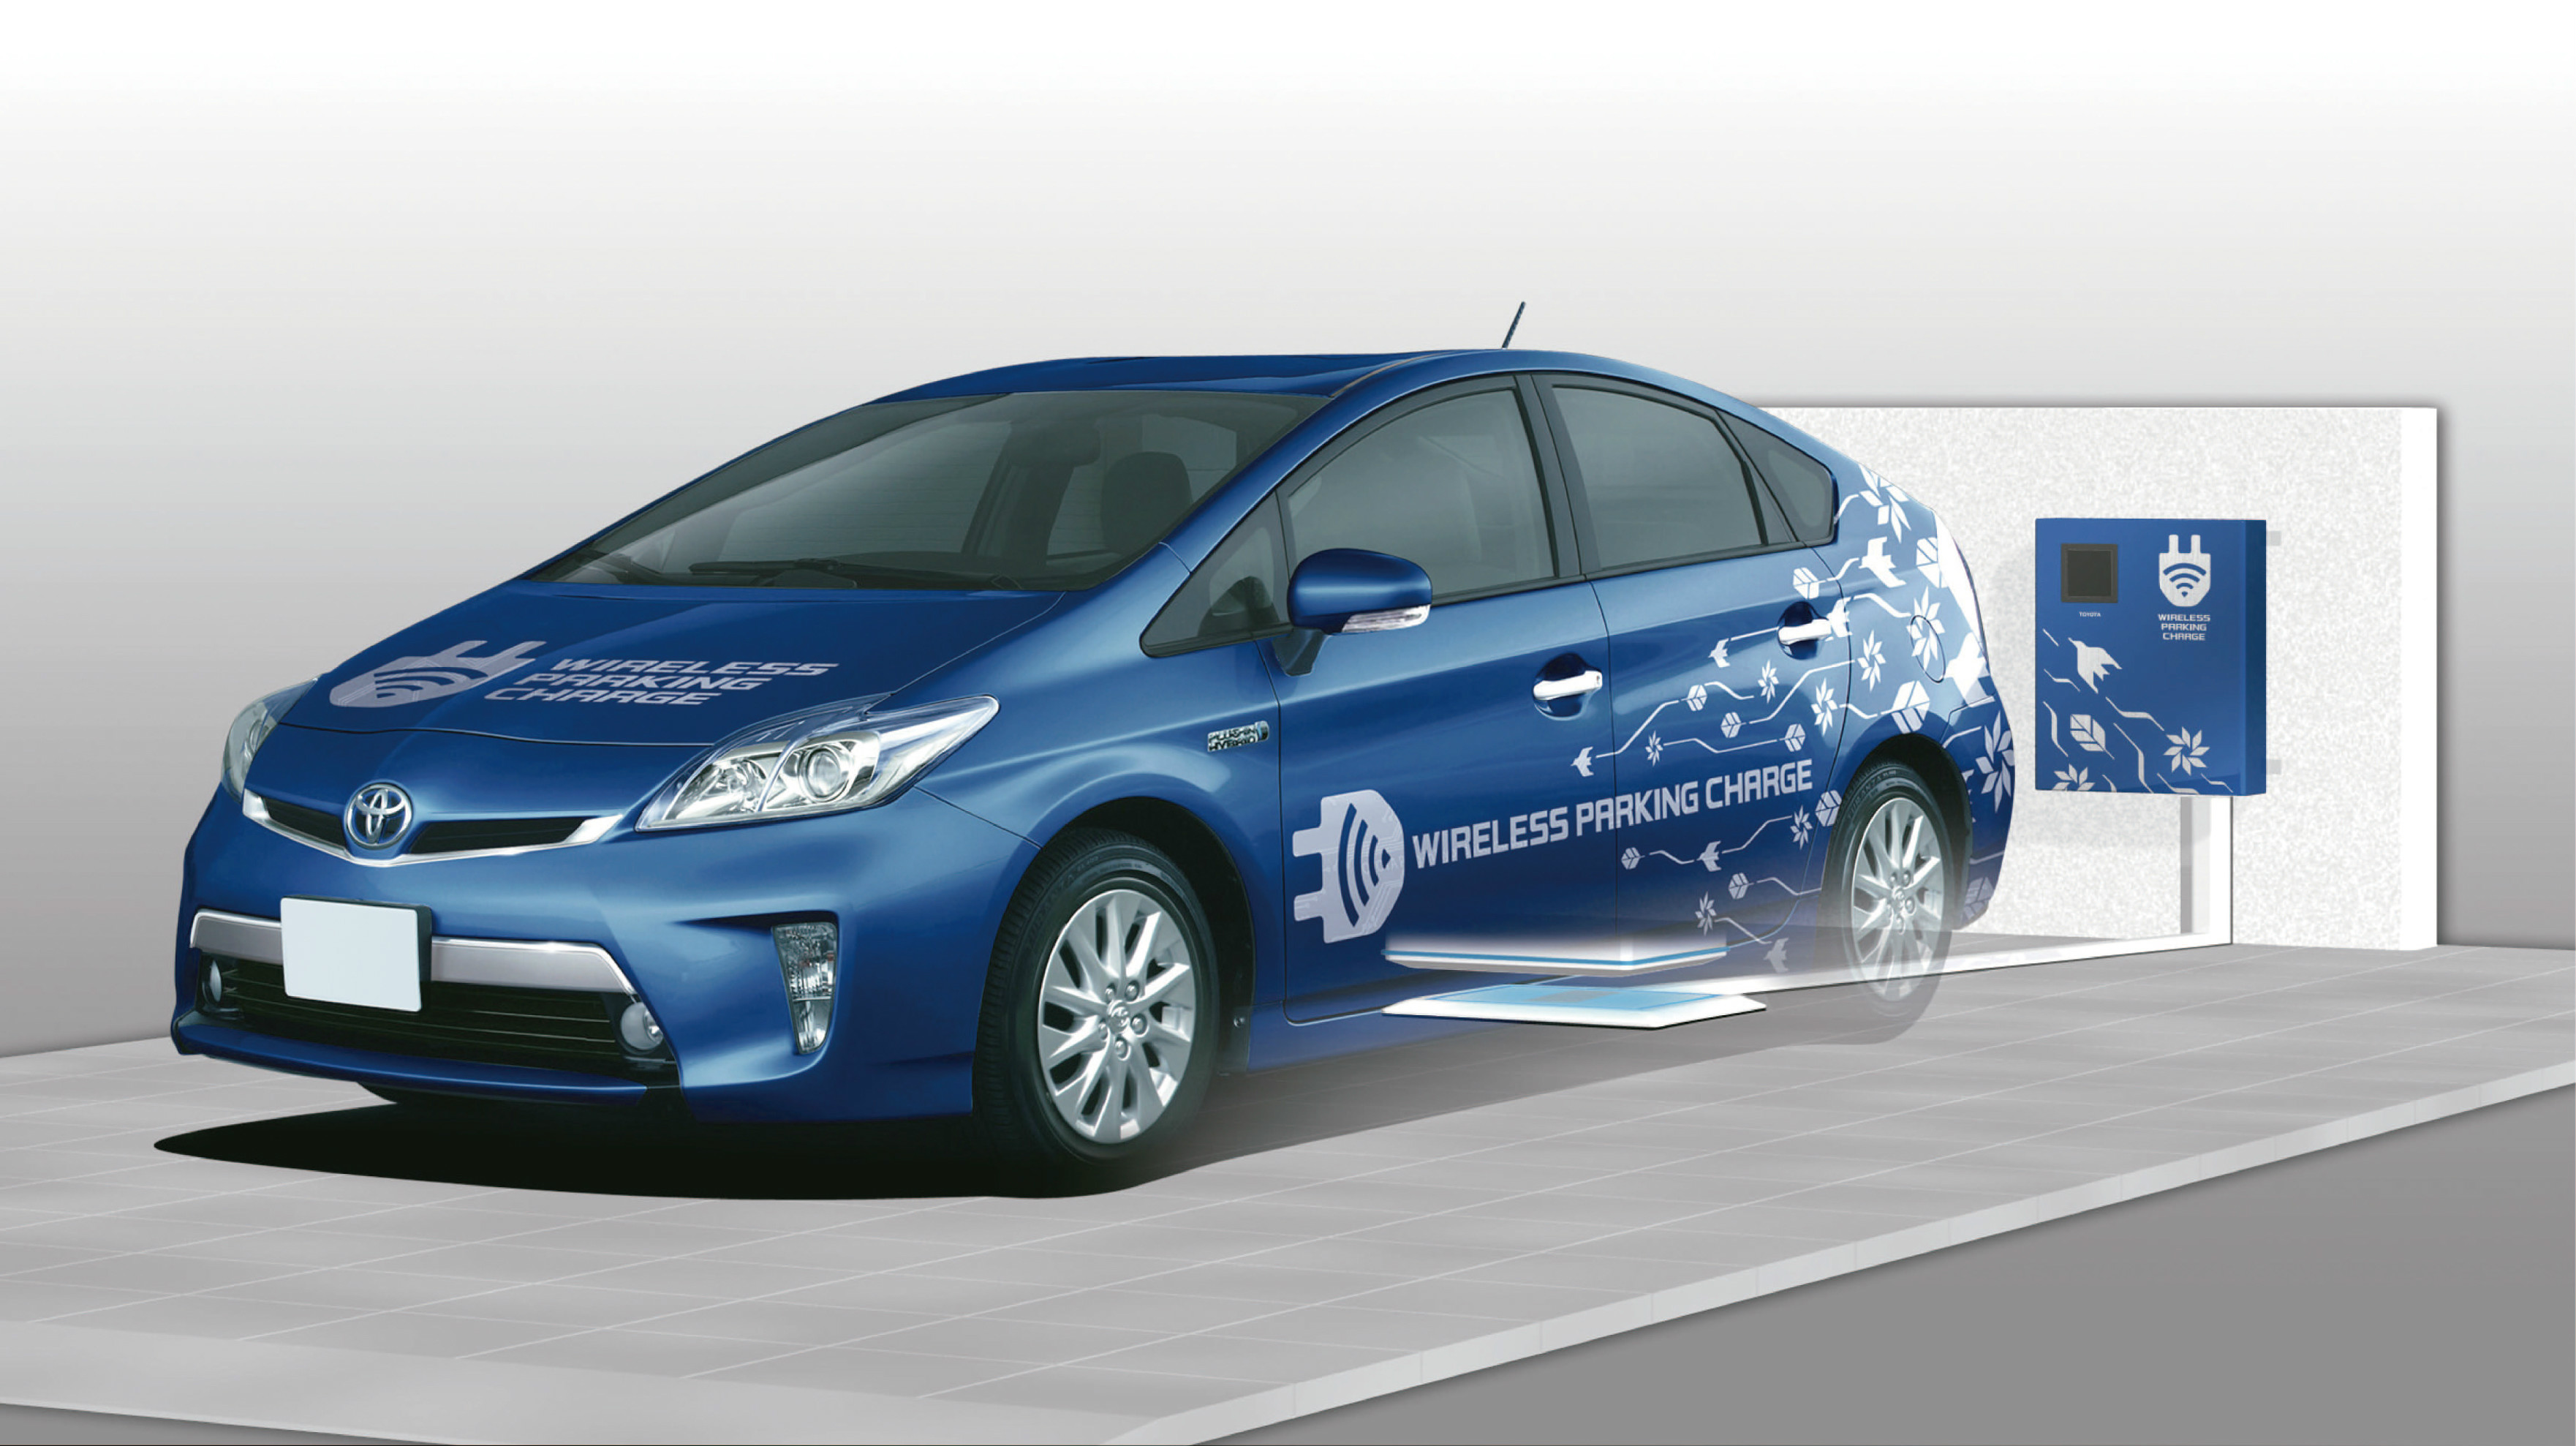 Toyota Prius Plug-in with wireless charging